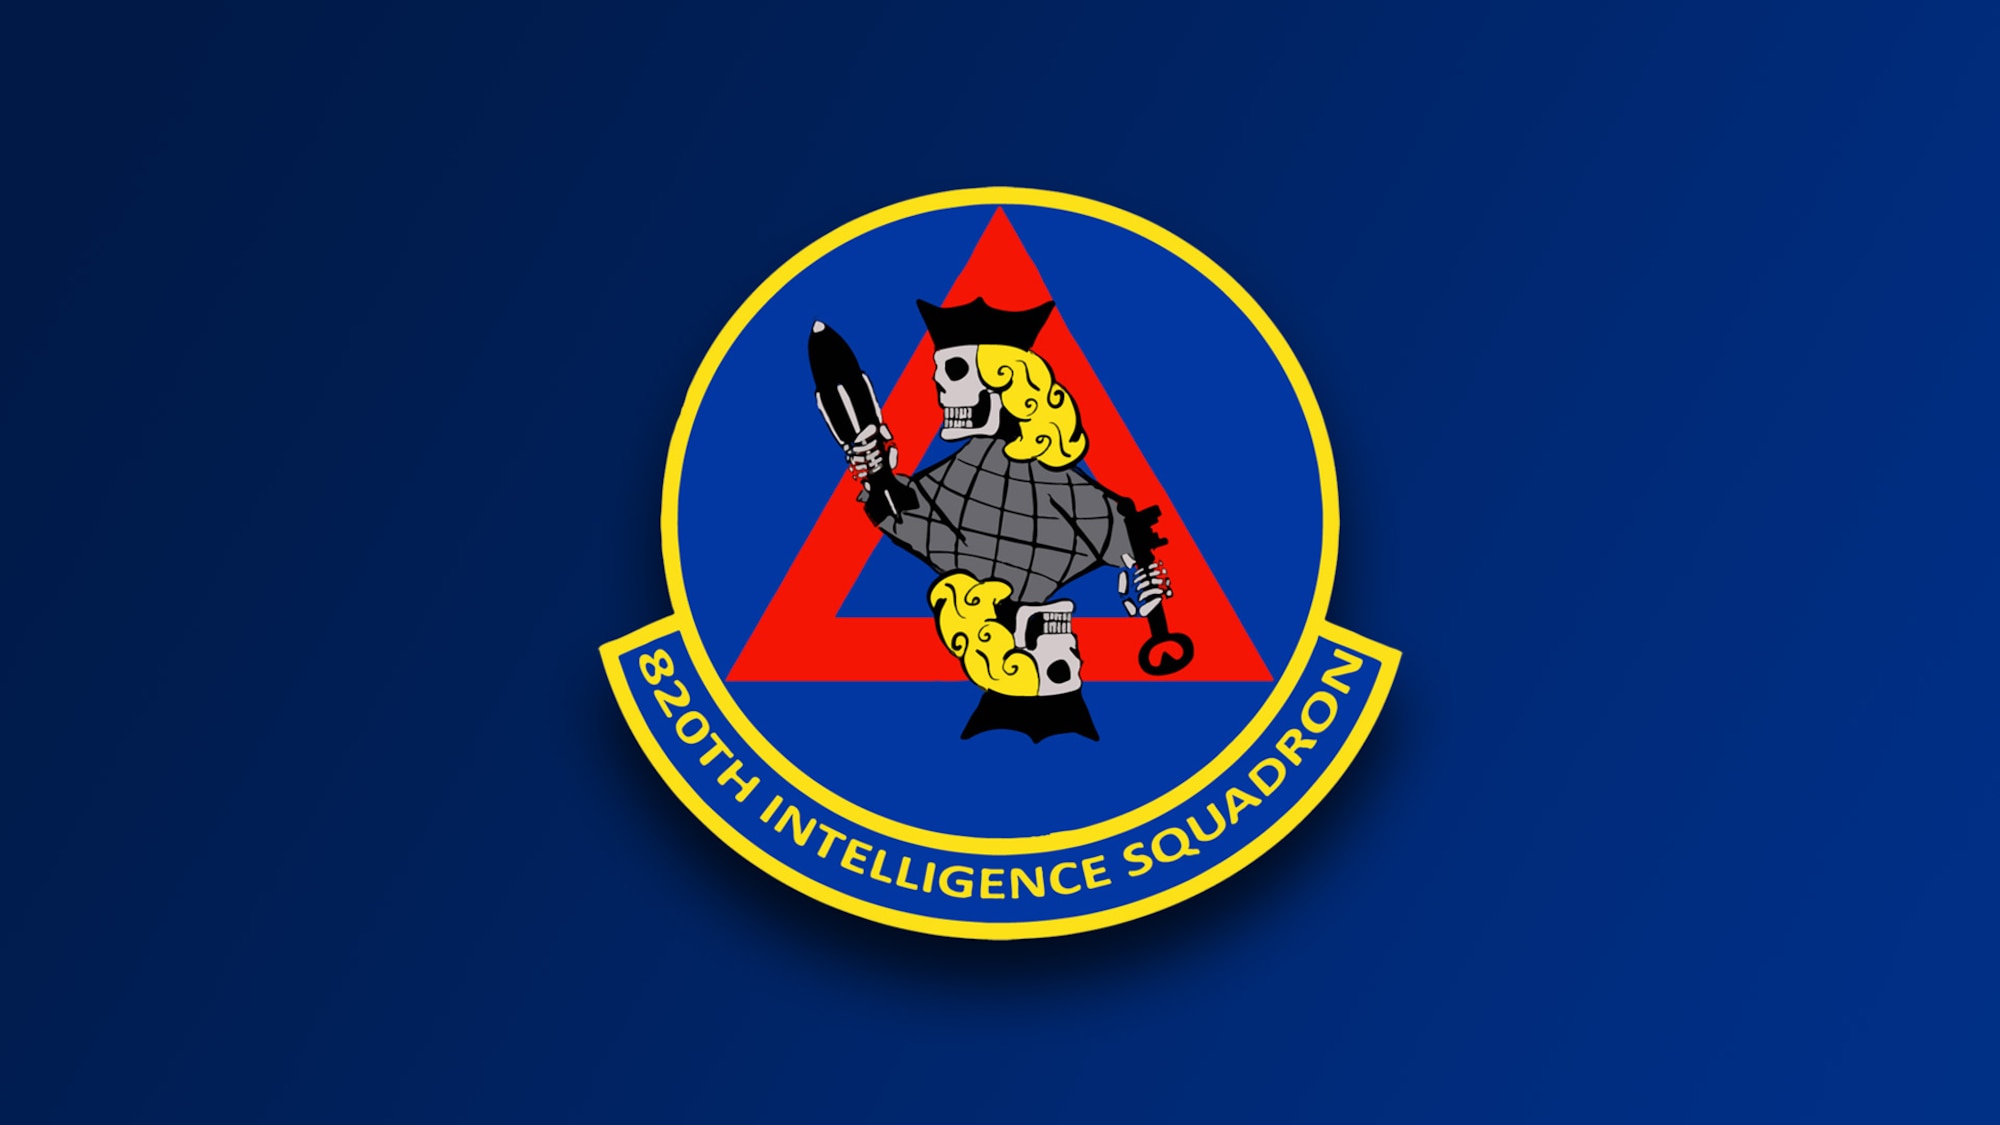 820th Intelligence squadron patch on a blue field